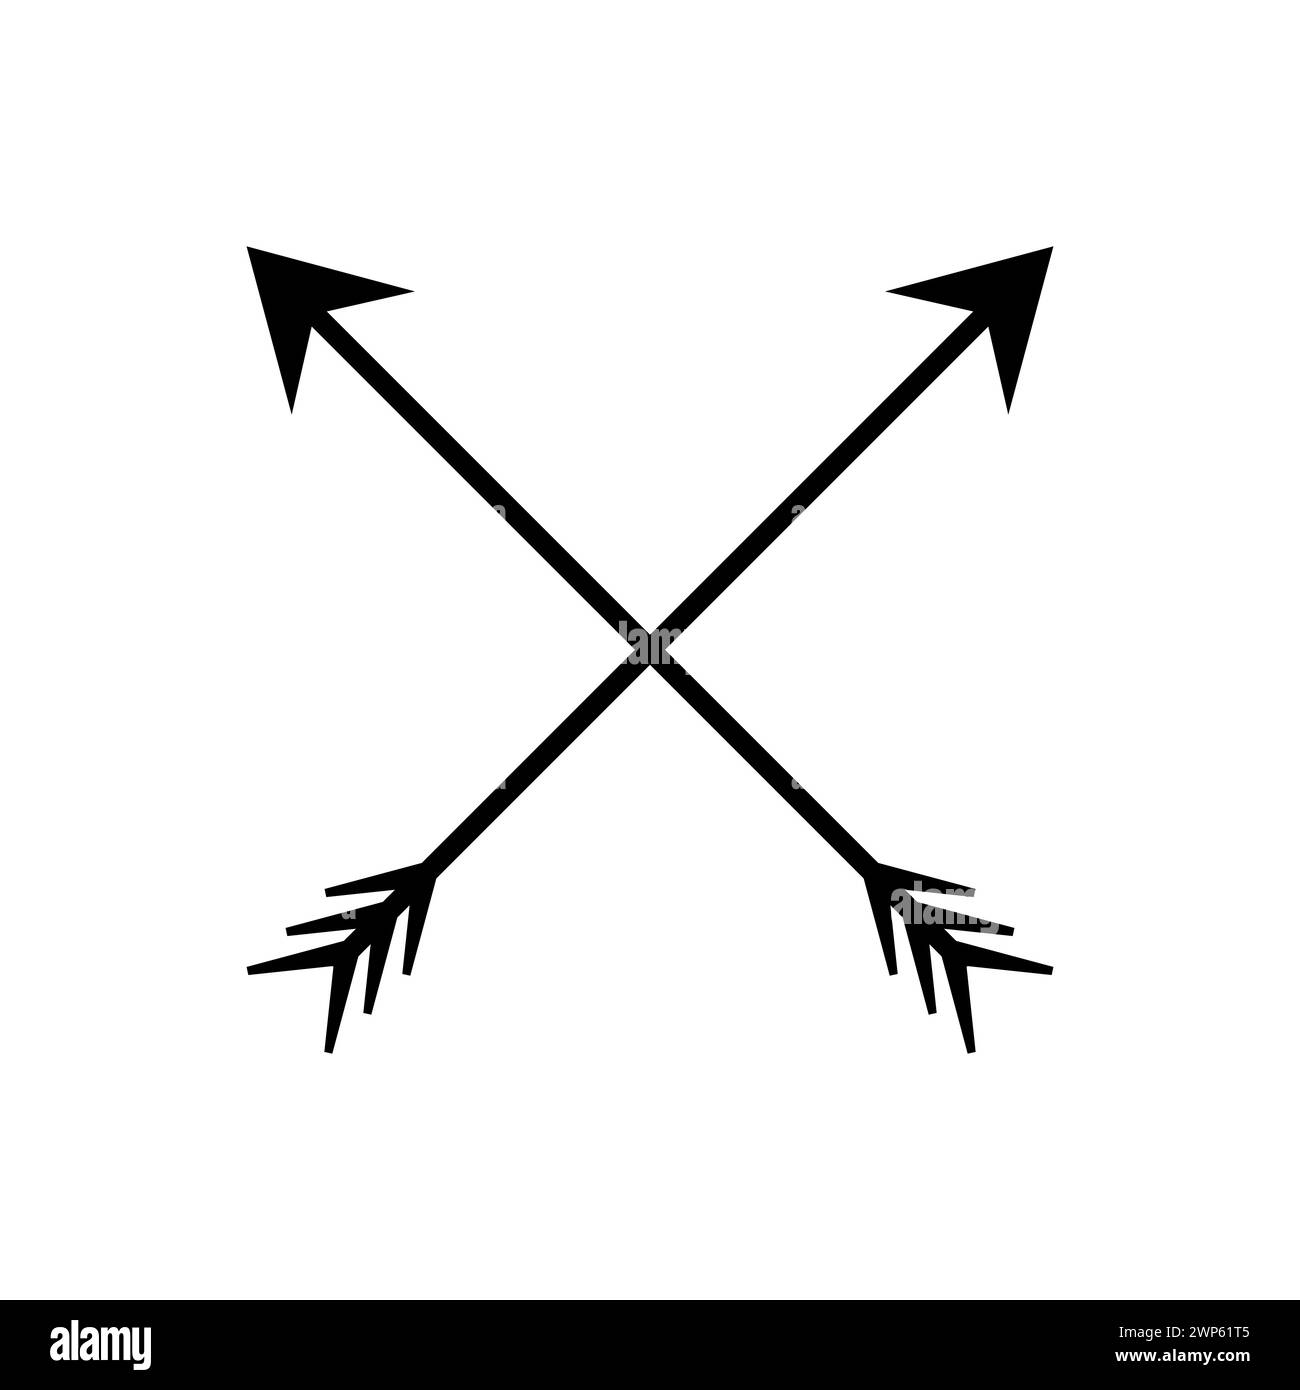 Two black arrows crossed over each other, forming an X shape. Crossed black arrows emblem. Symbol of conflict and intersection. Vector illustration Stock Vector